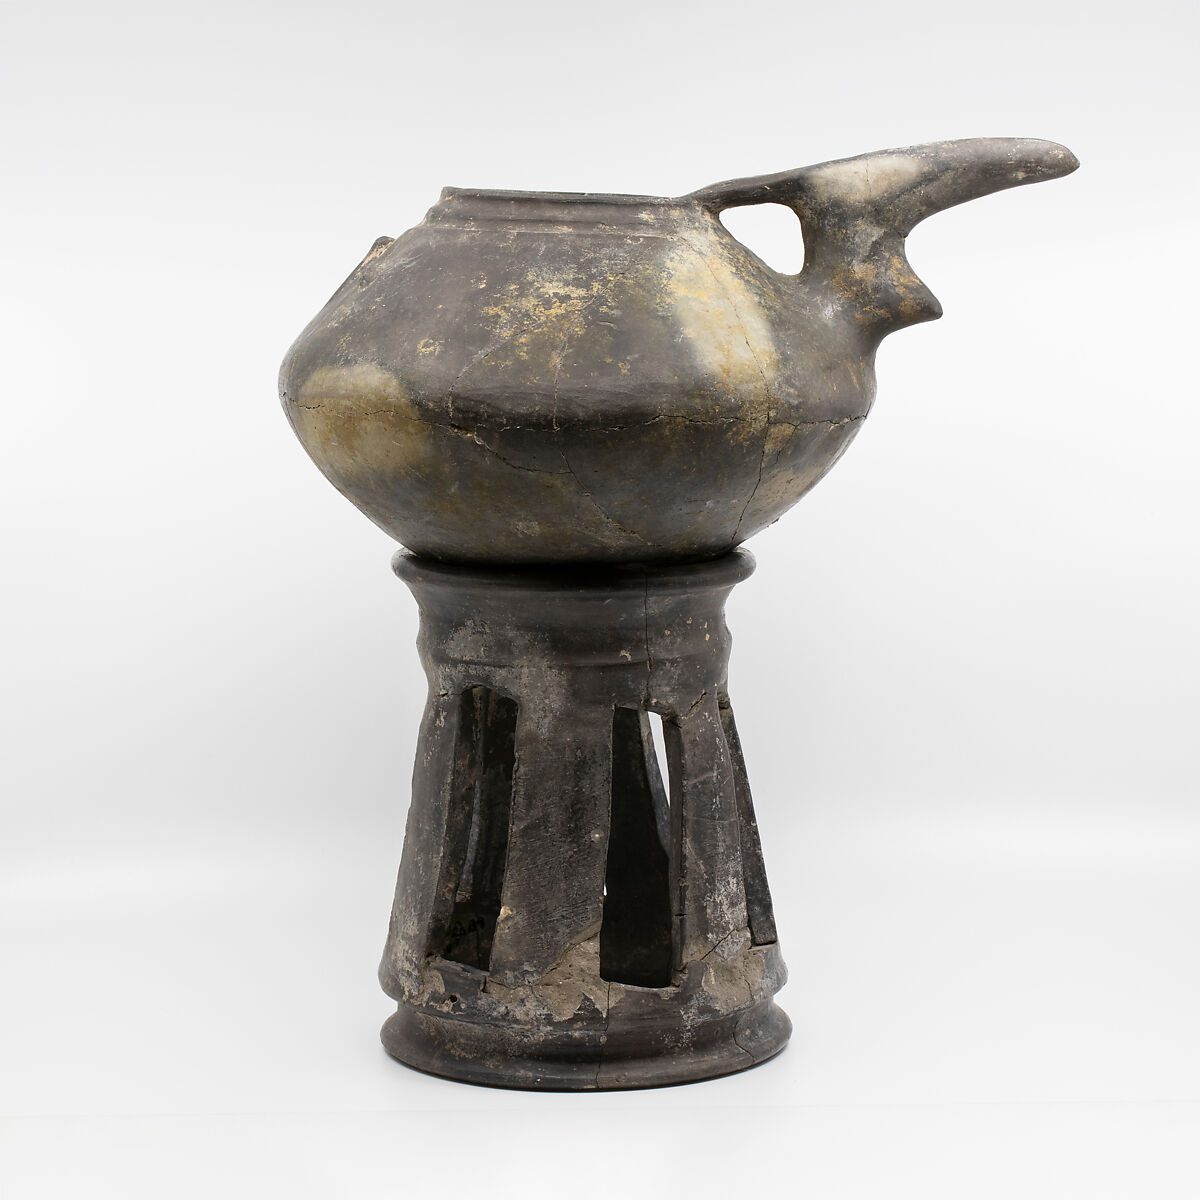 Spouted jar and stand, Ceramic, Iran 